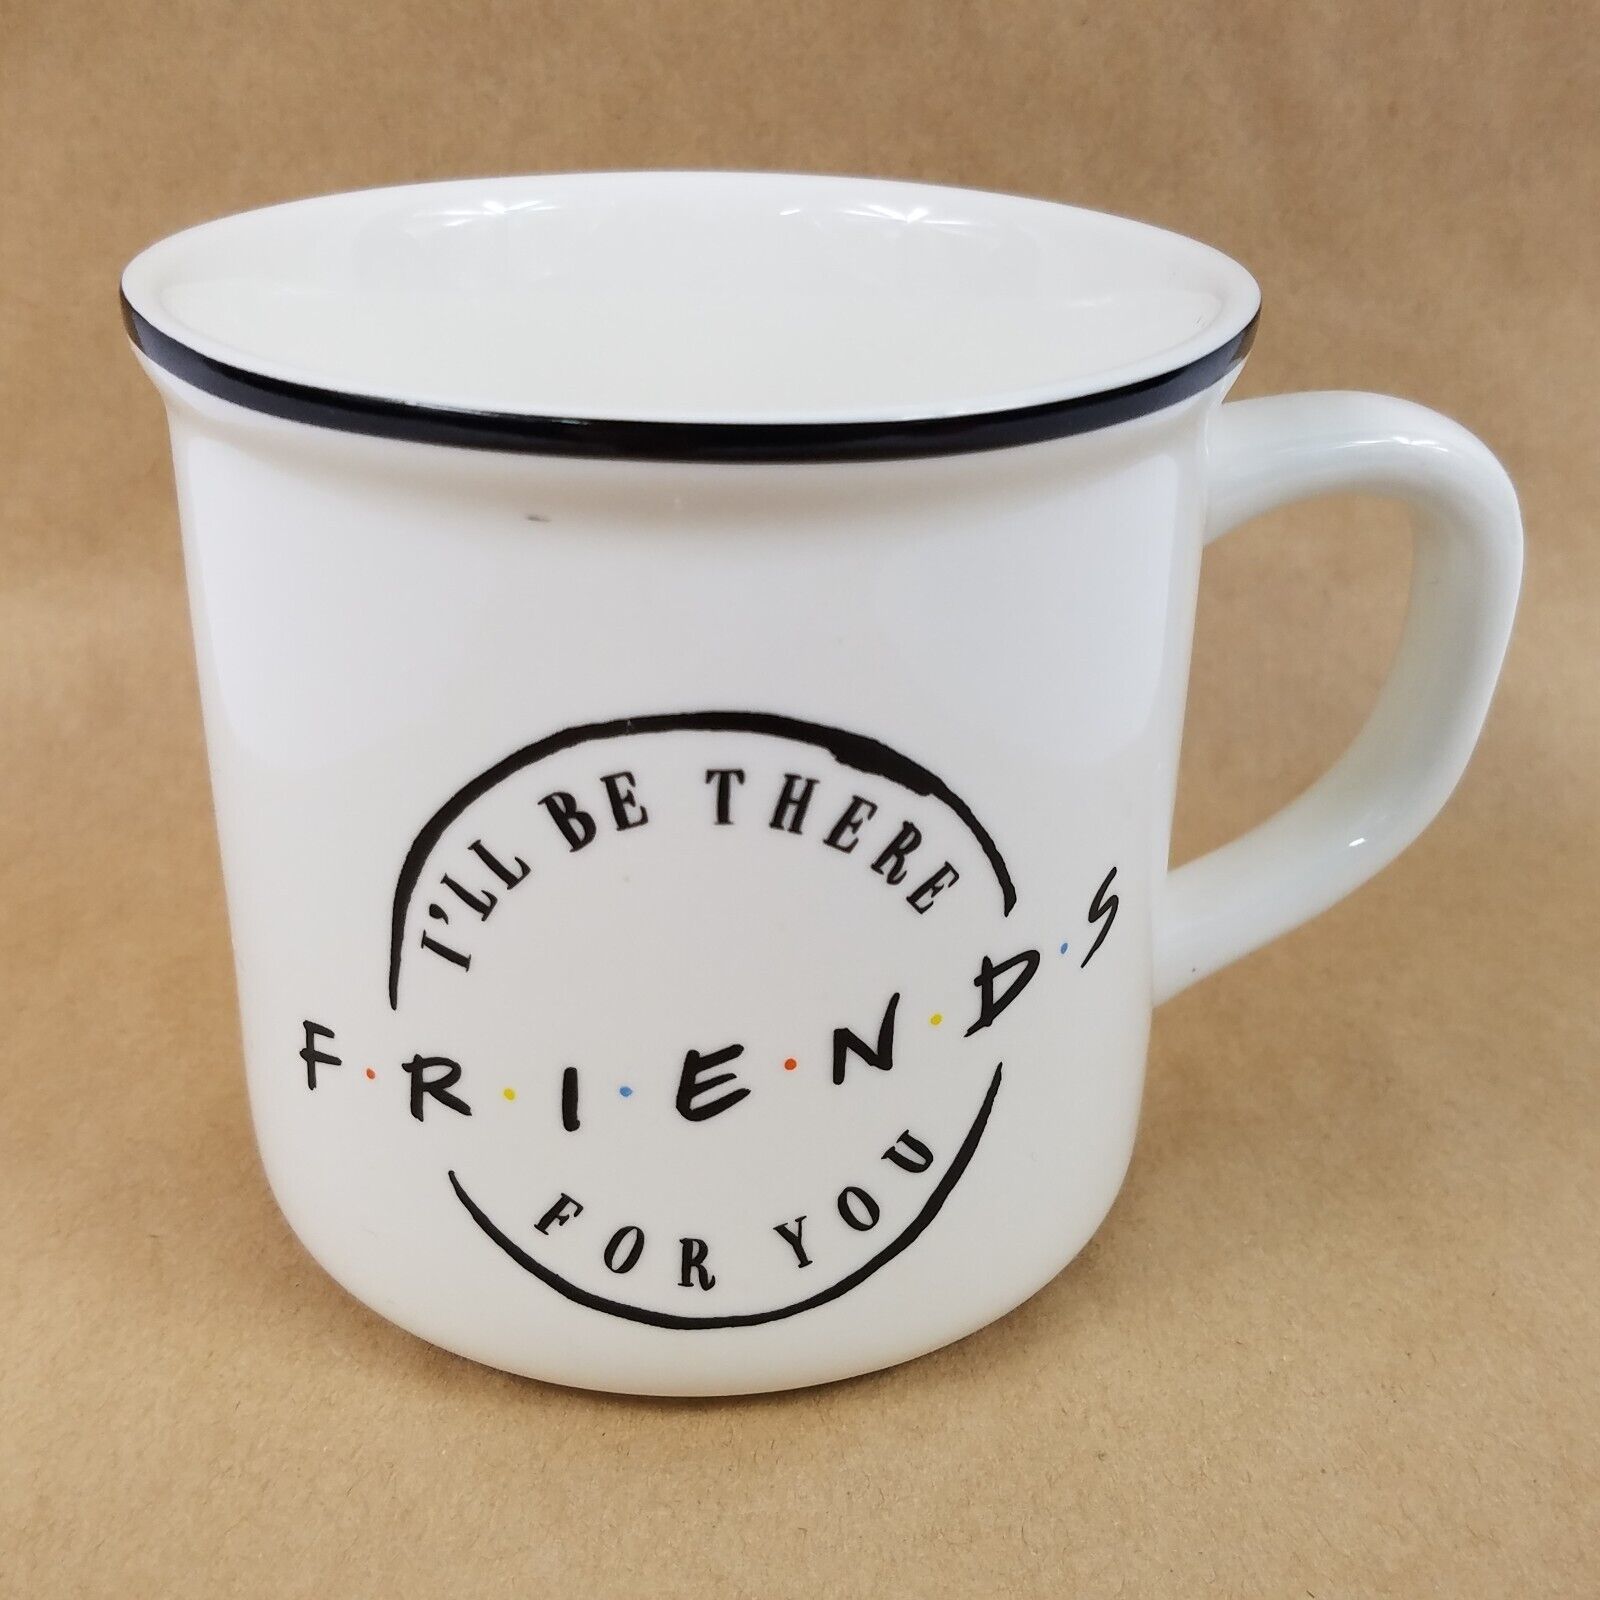 Primary image for Pottery Barn Friends "I'll Be There For You" Mug Coffee Cup Friends TV Show 